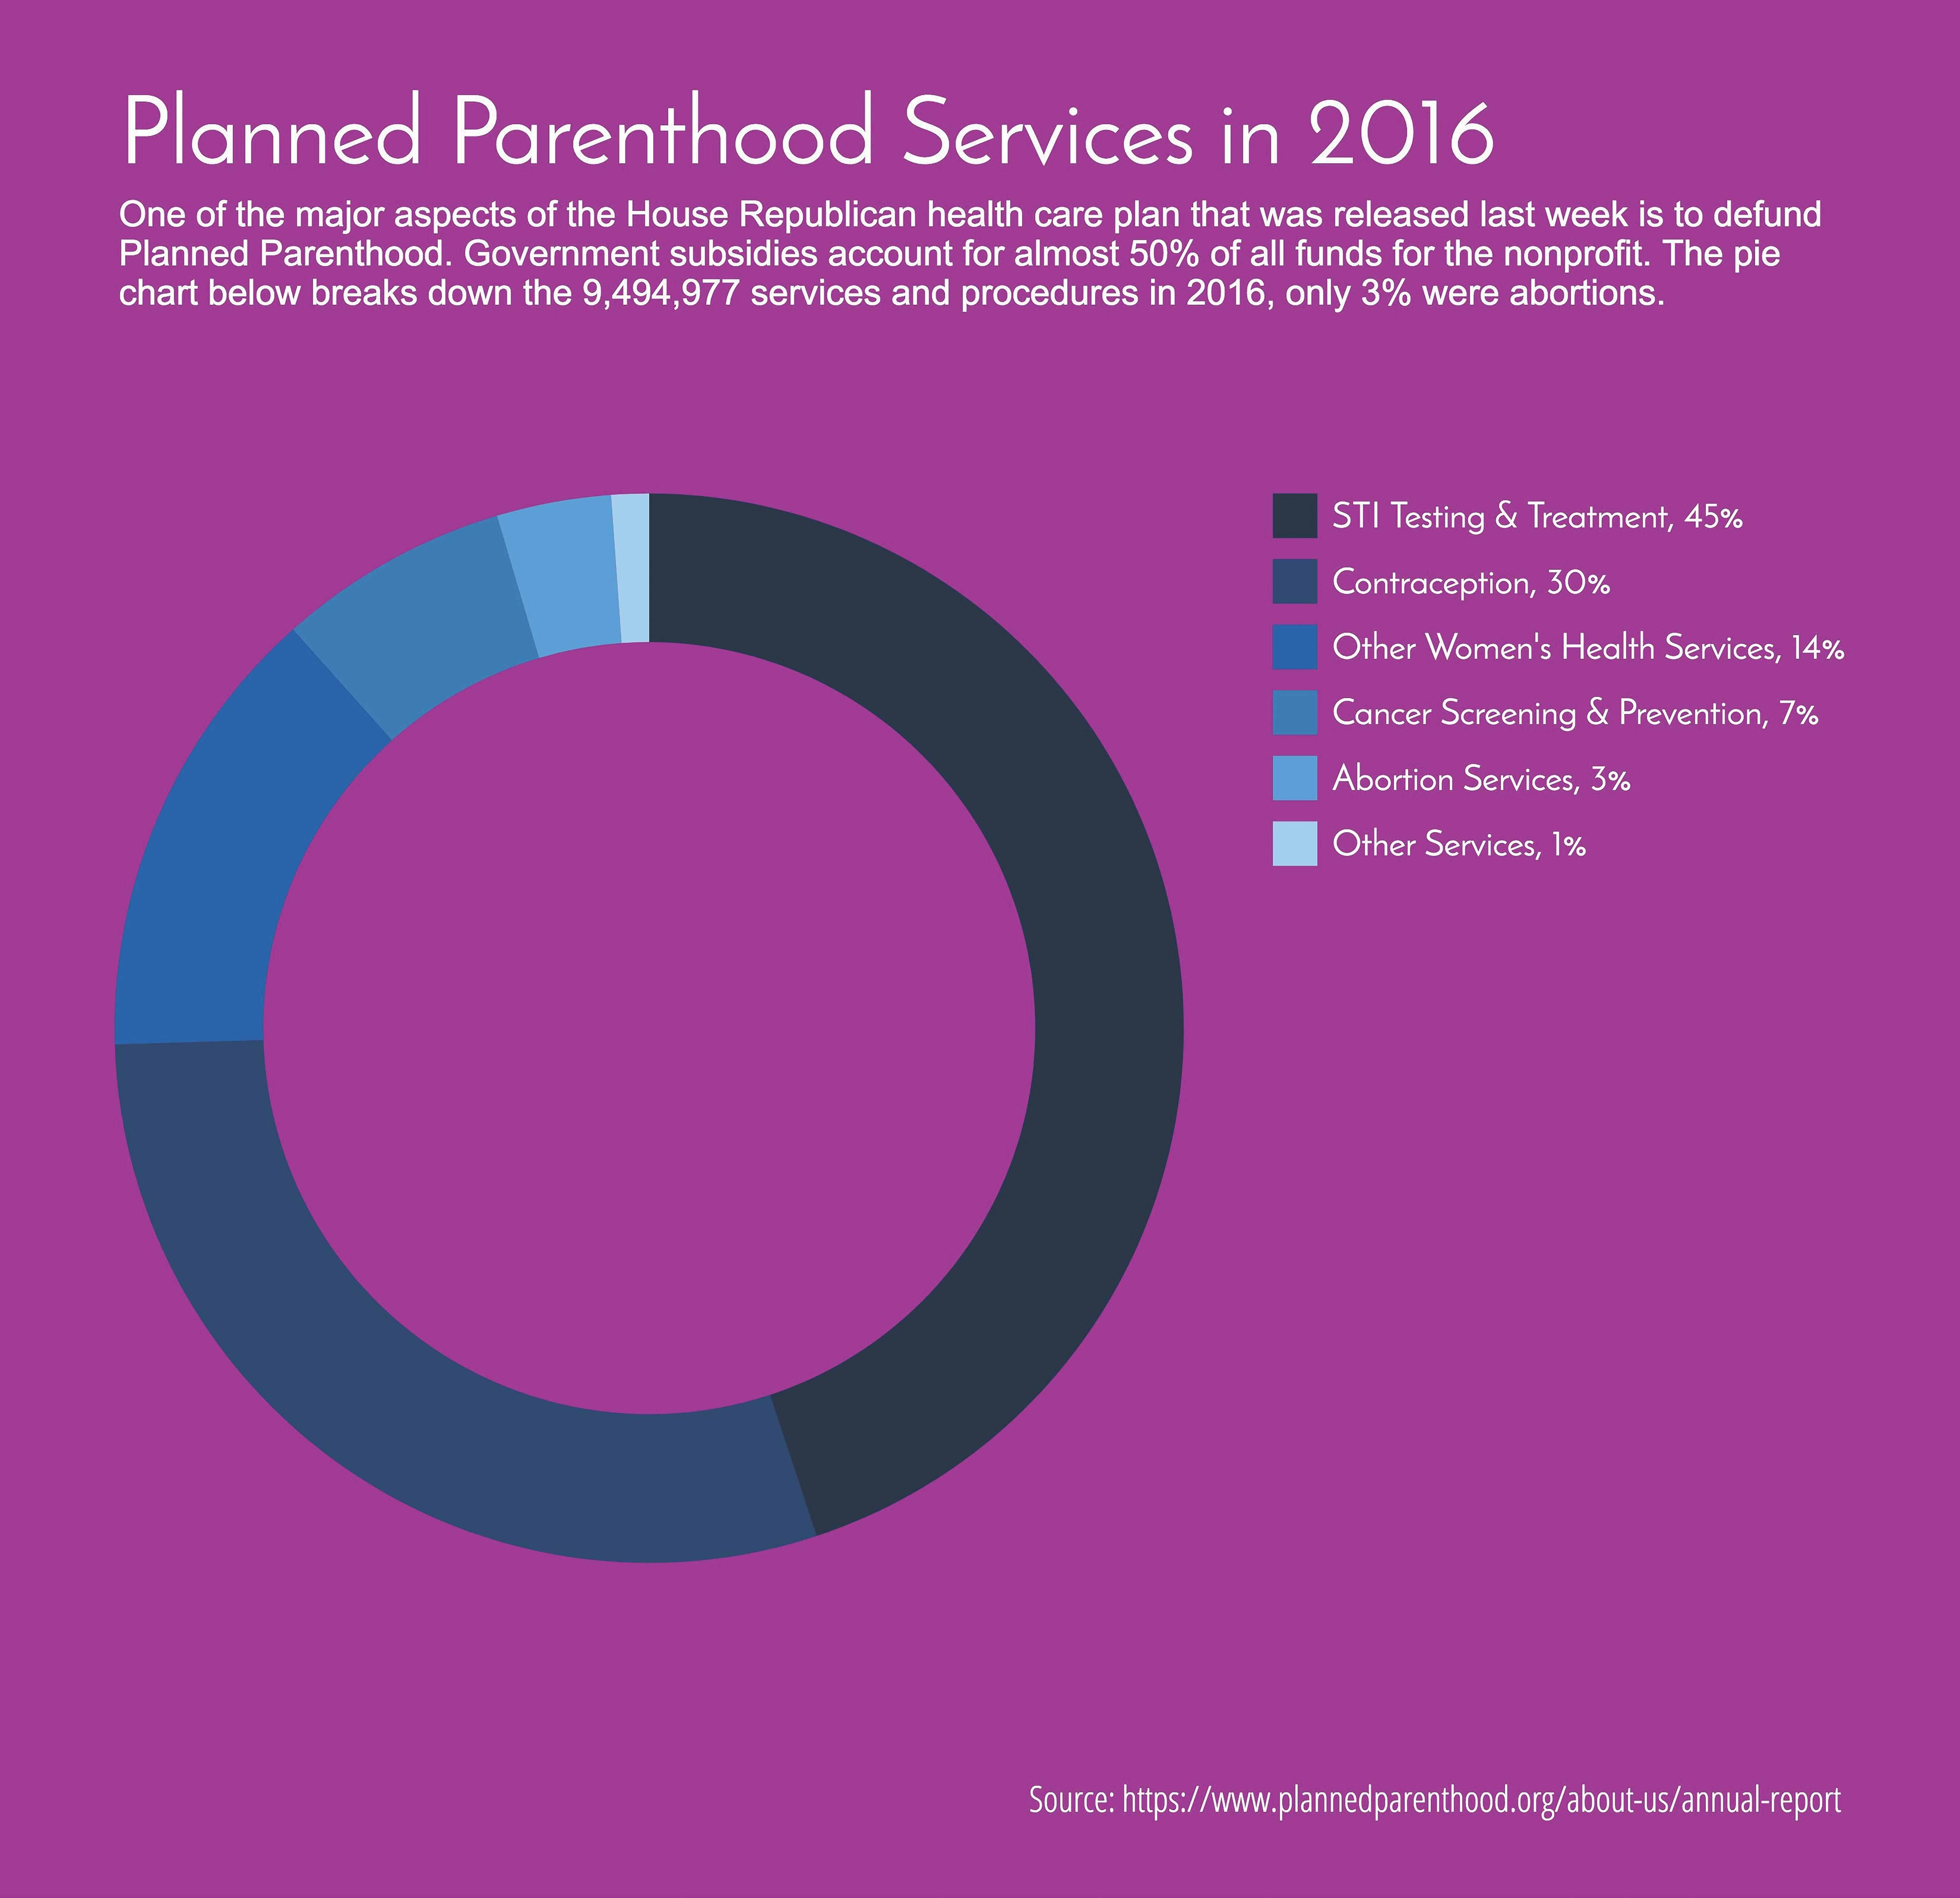 A pie chart shows abortions accounted for only 3% of Planned Parenthood services in 2016. The majority of services were for STIs (45%) and contraception (30%).